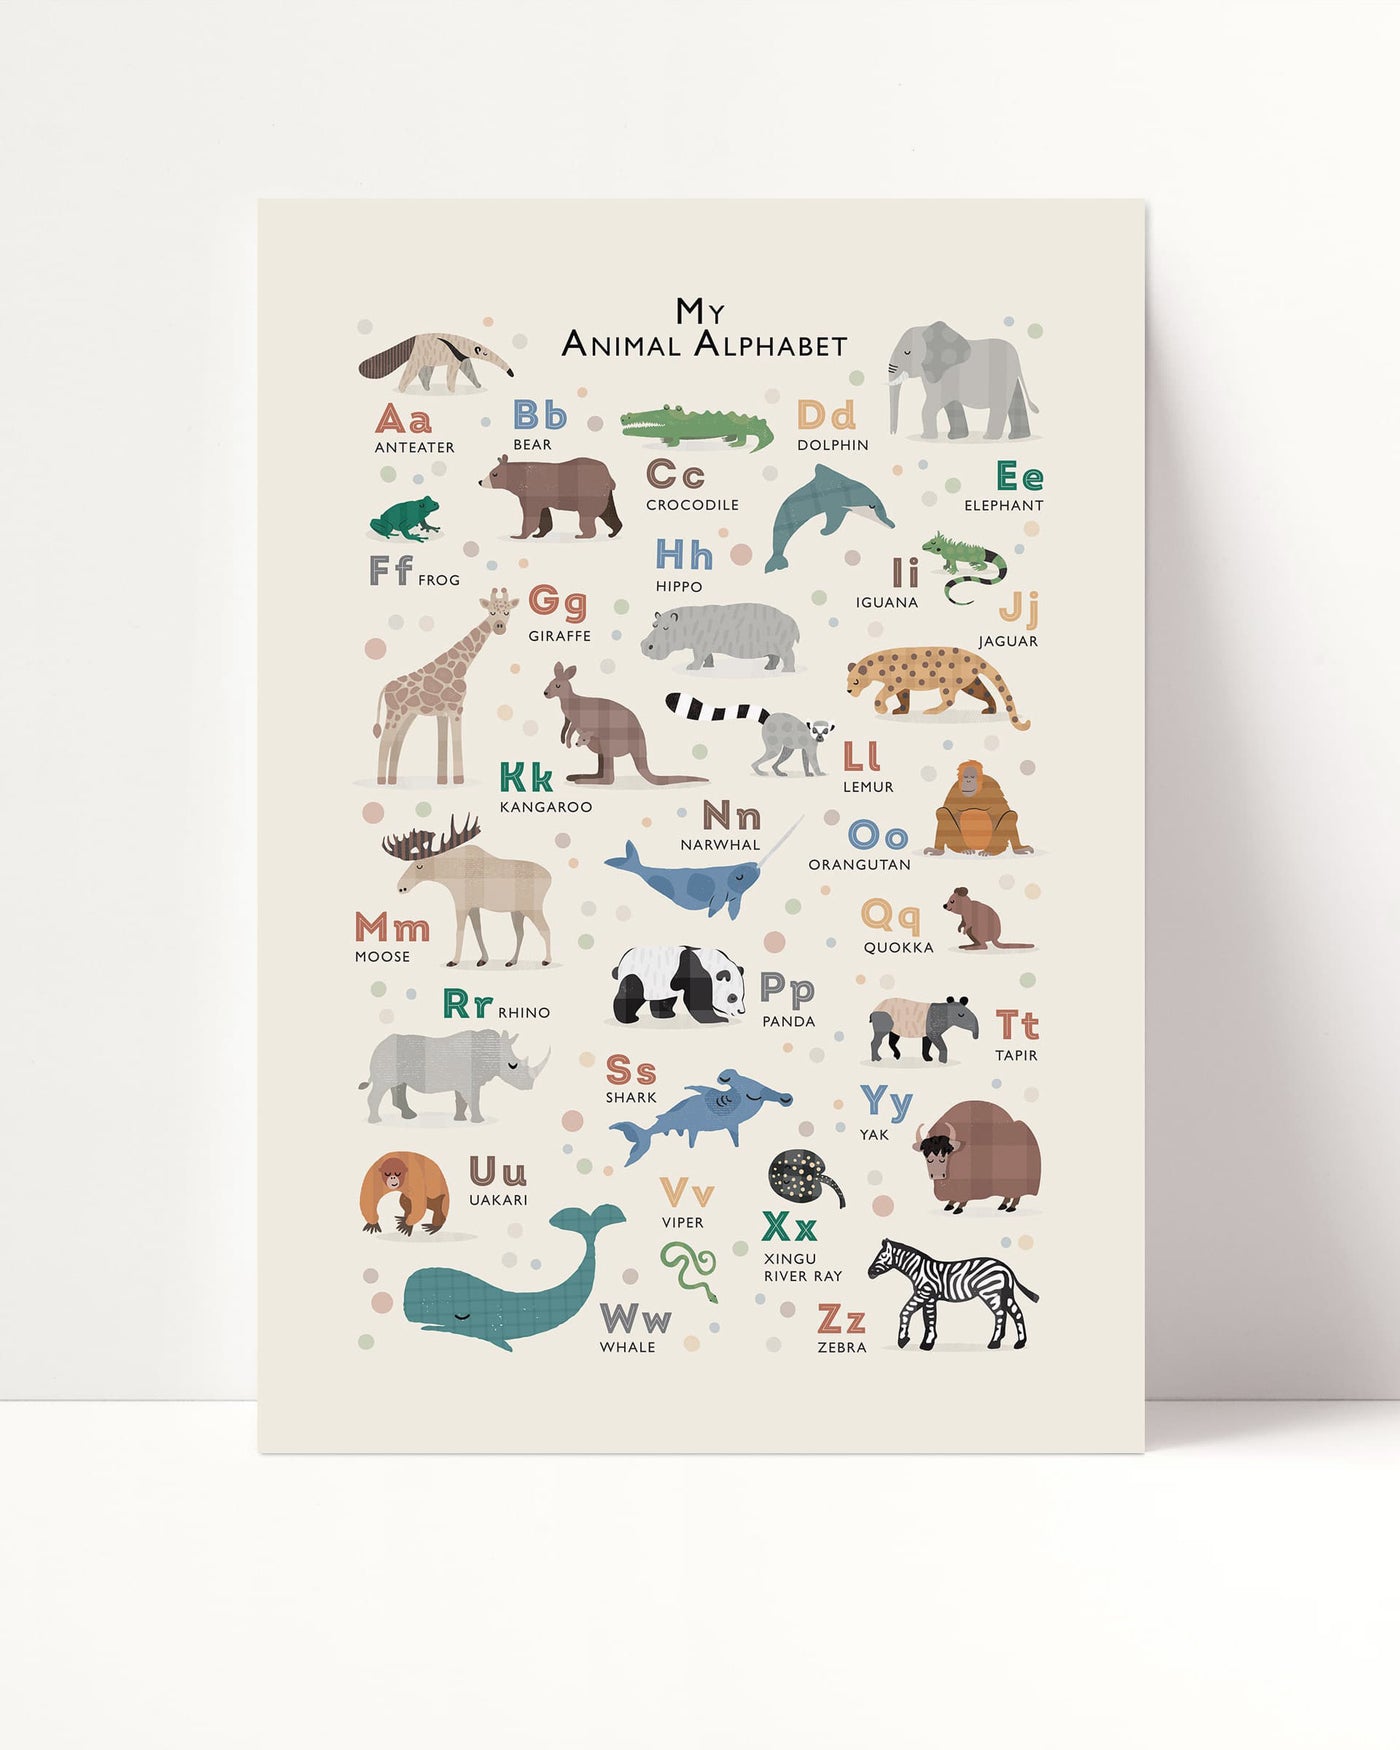 The Animal Alphabet print standing upright, presented against a plain background, highlighting the full range of colorful animal illustrations and corresponding alphabet letters.